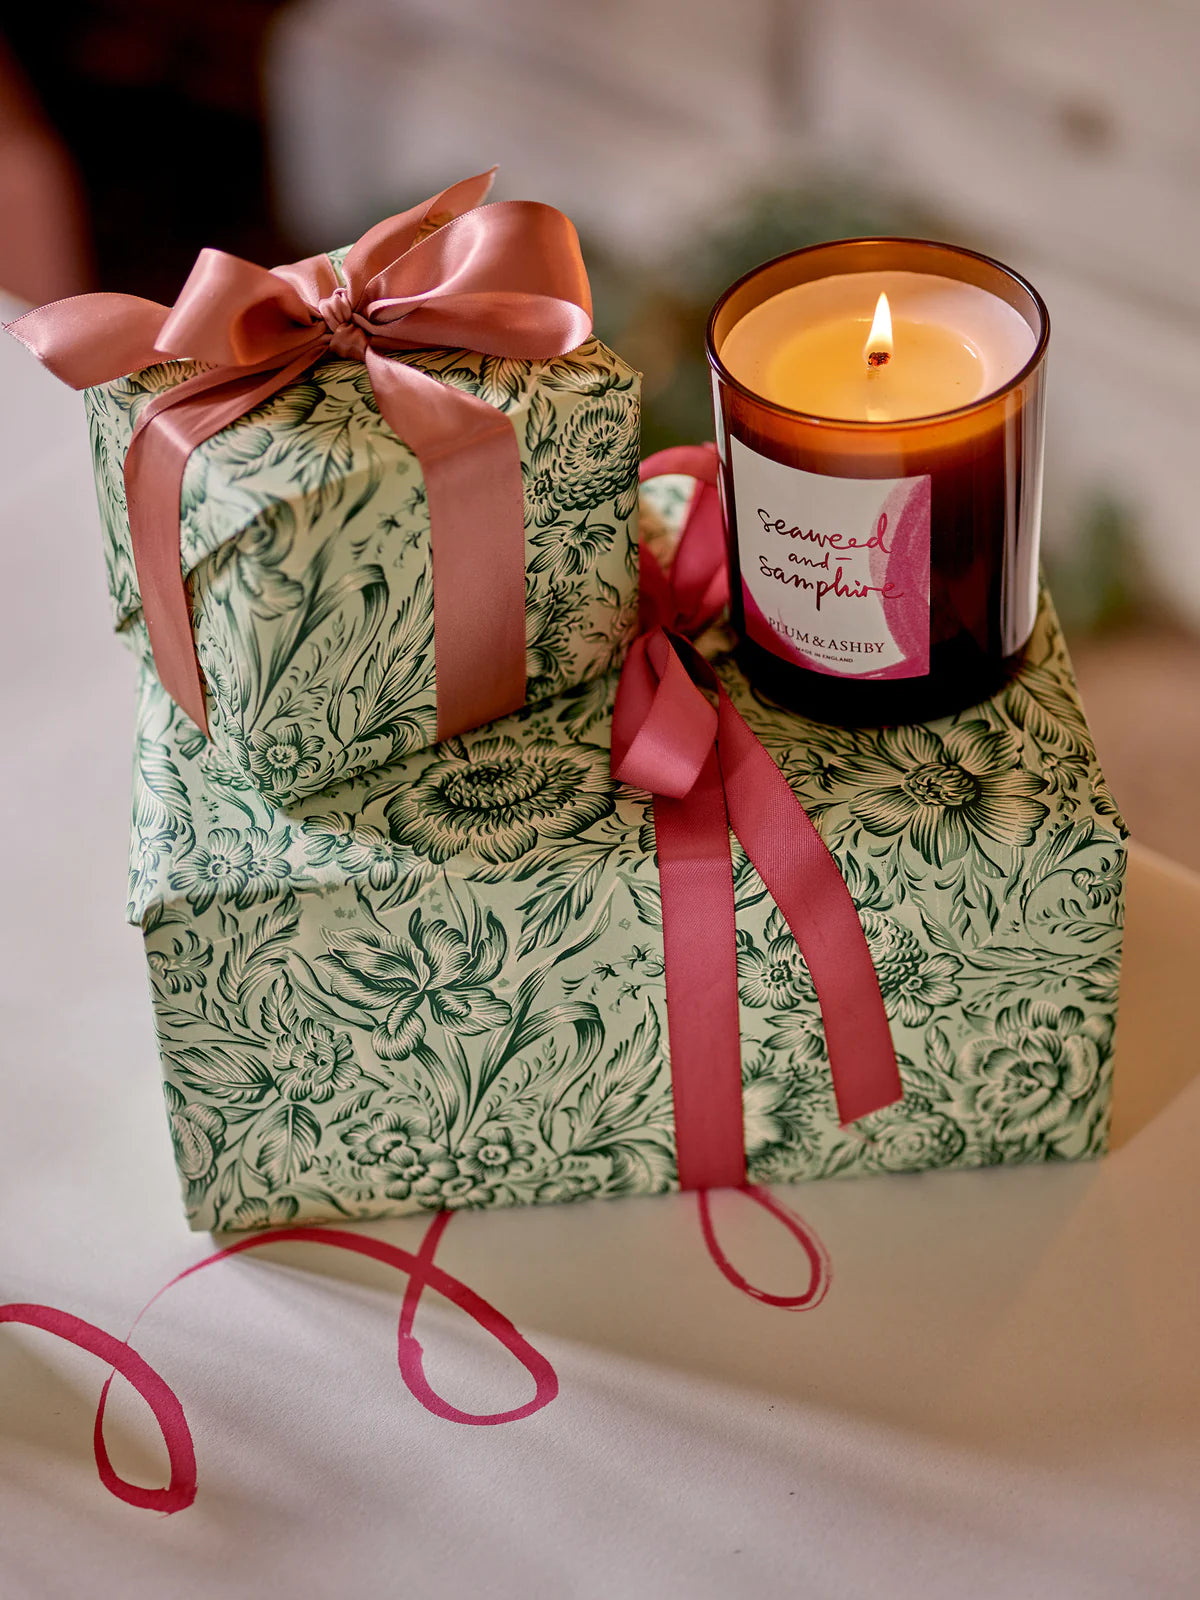 Plum & Ashby Candle | Seaweed & Samphire Candle Plum & Ashby 